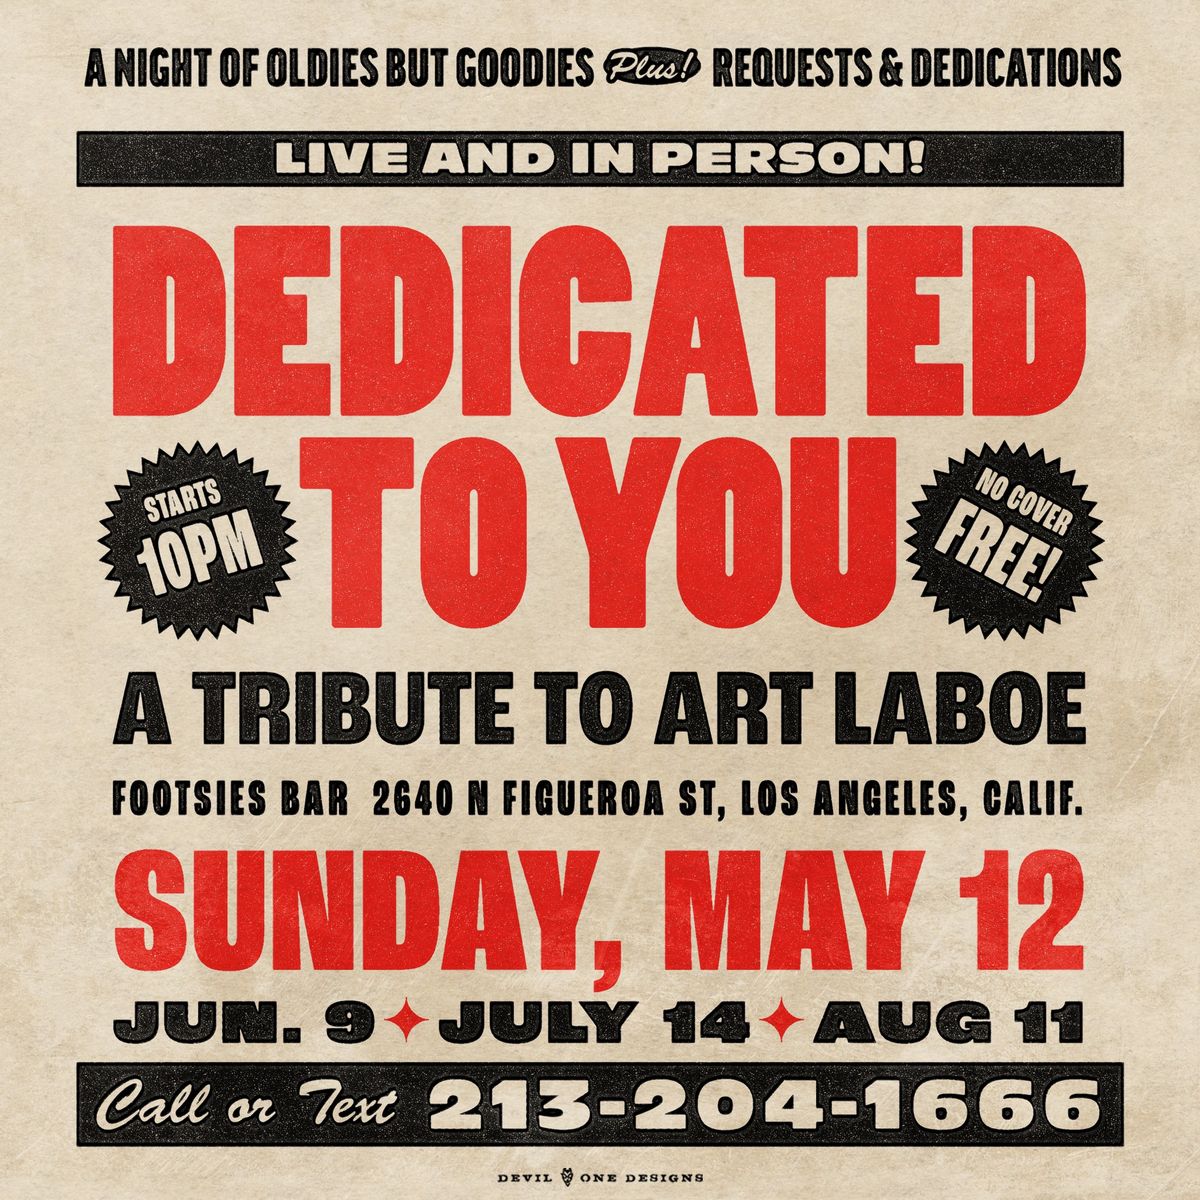 Dedicated To You: A Tribute to Art Laboe, Mother's Day Special